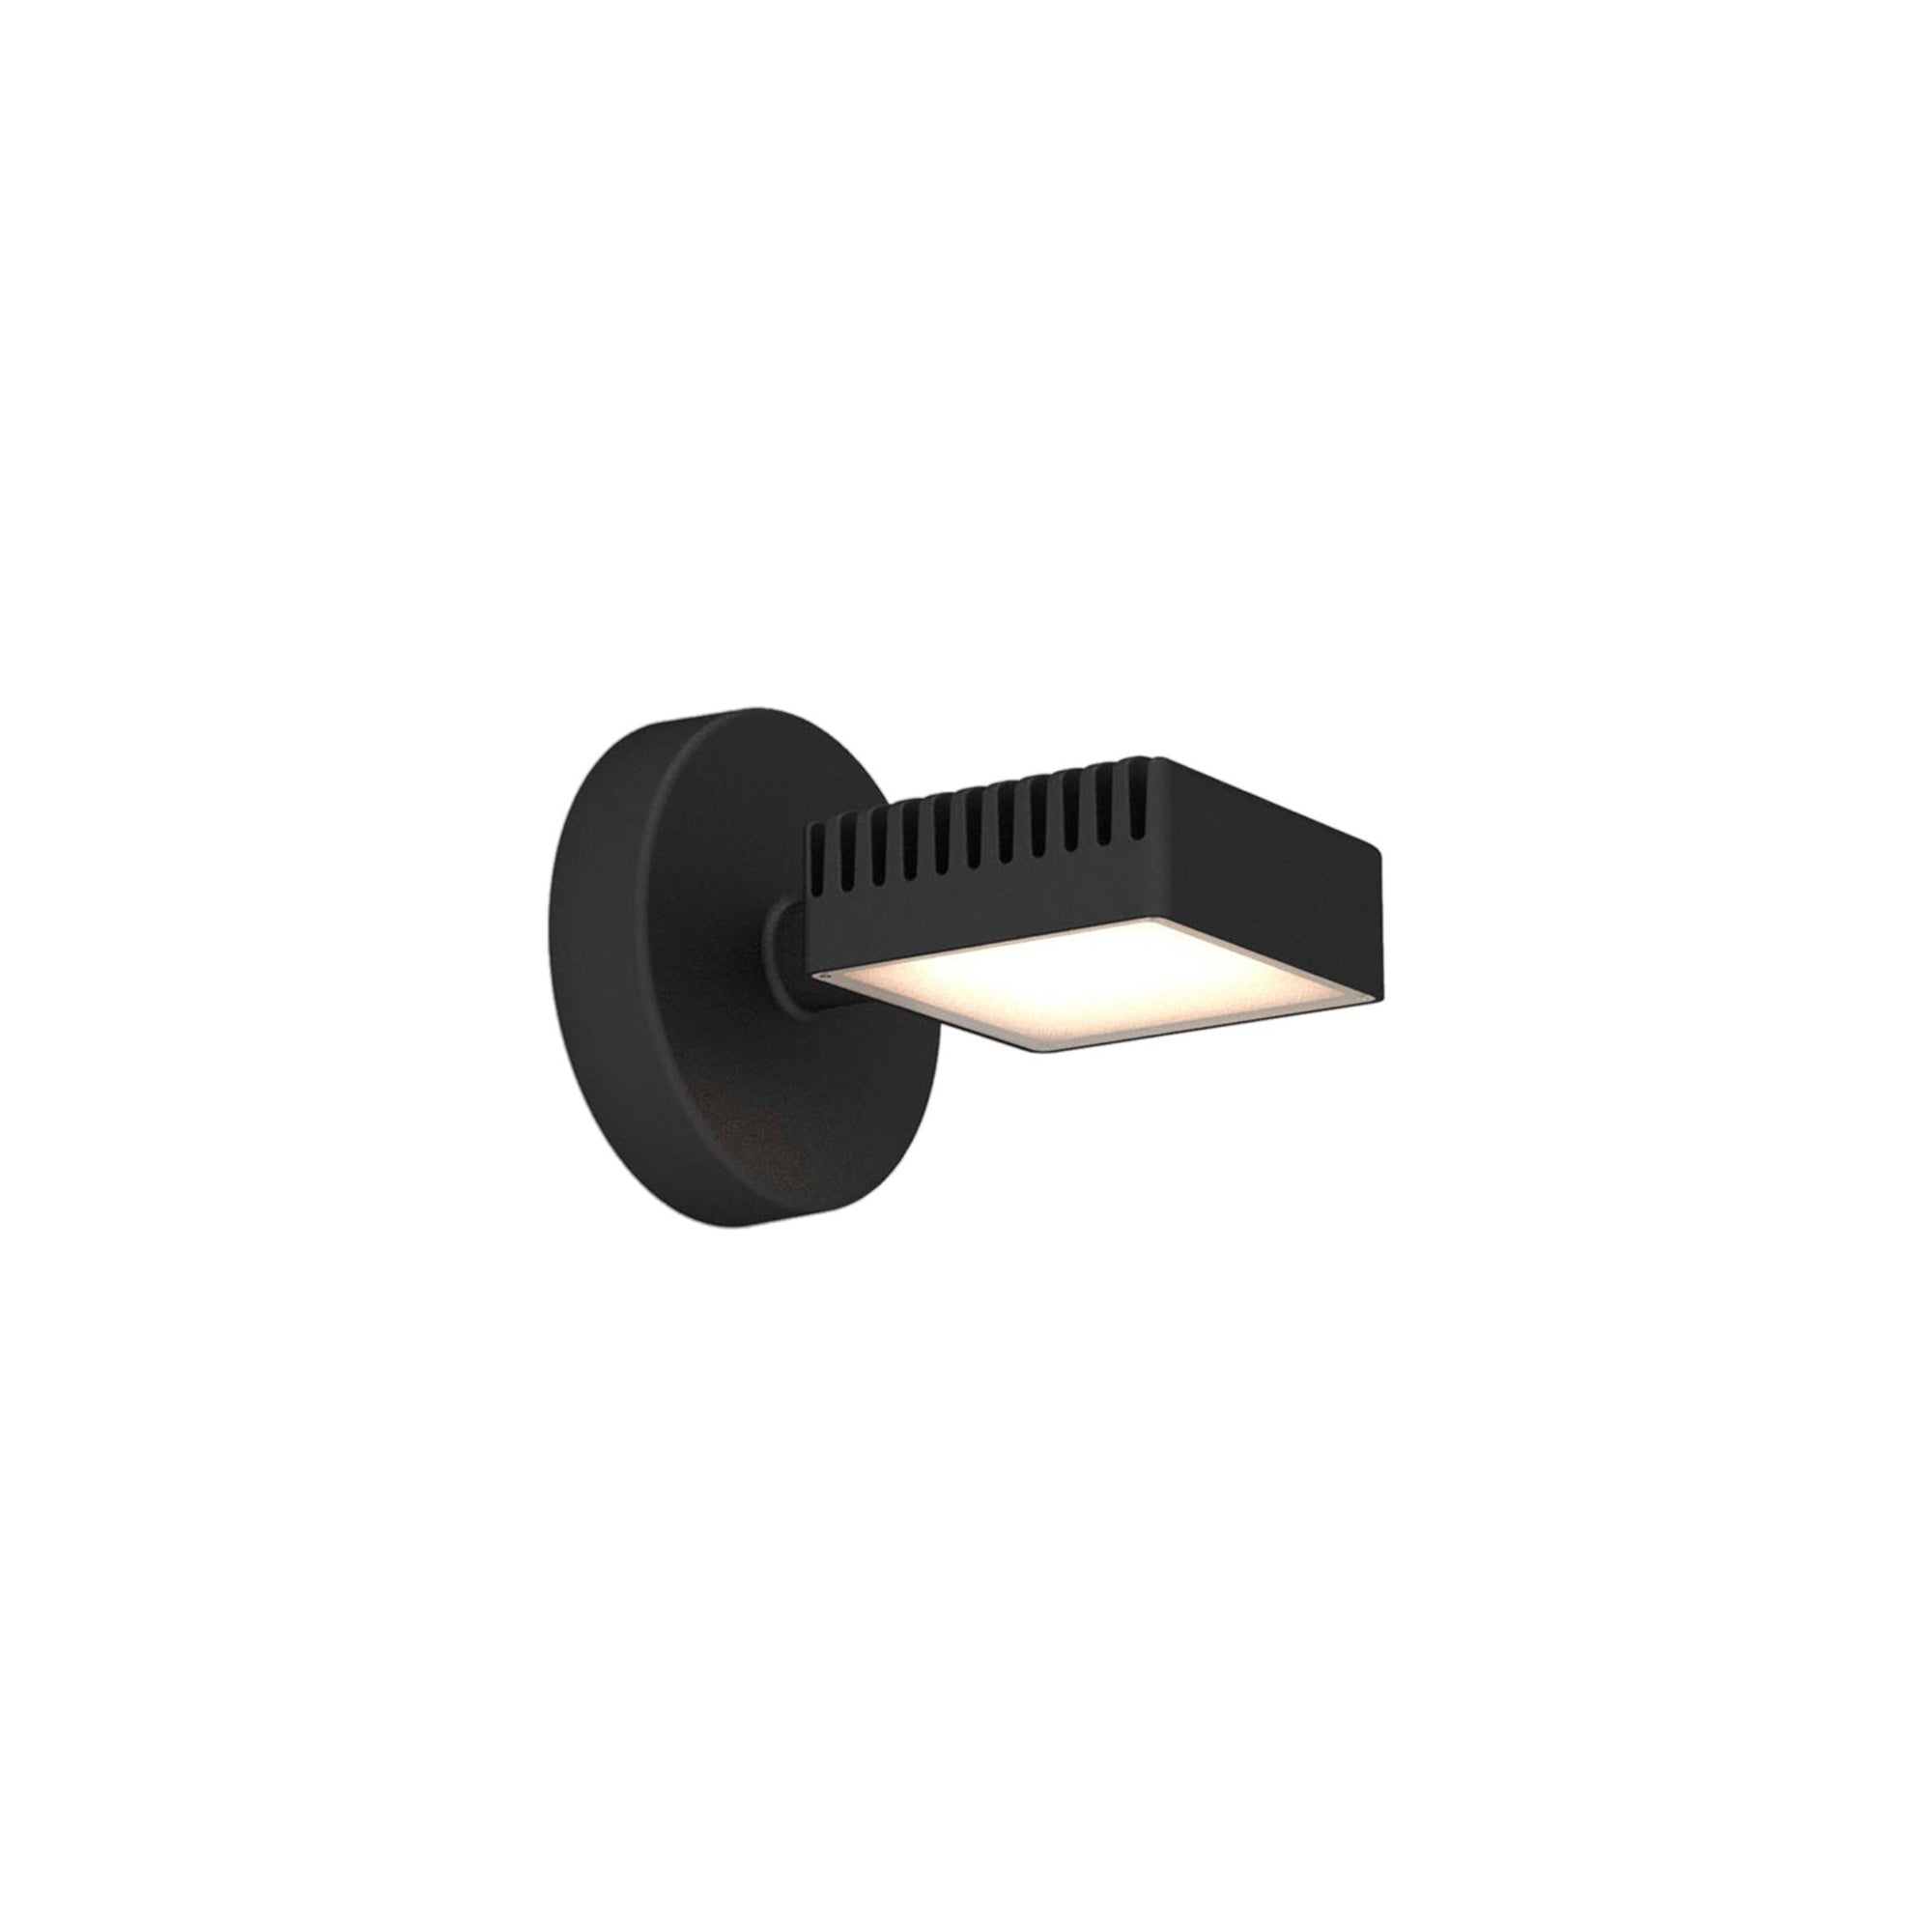 Dorval 04 Wall Lamp: Hardwire + Black